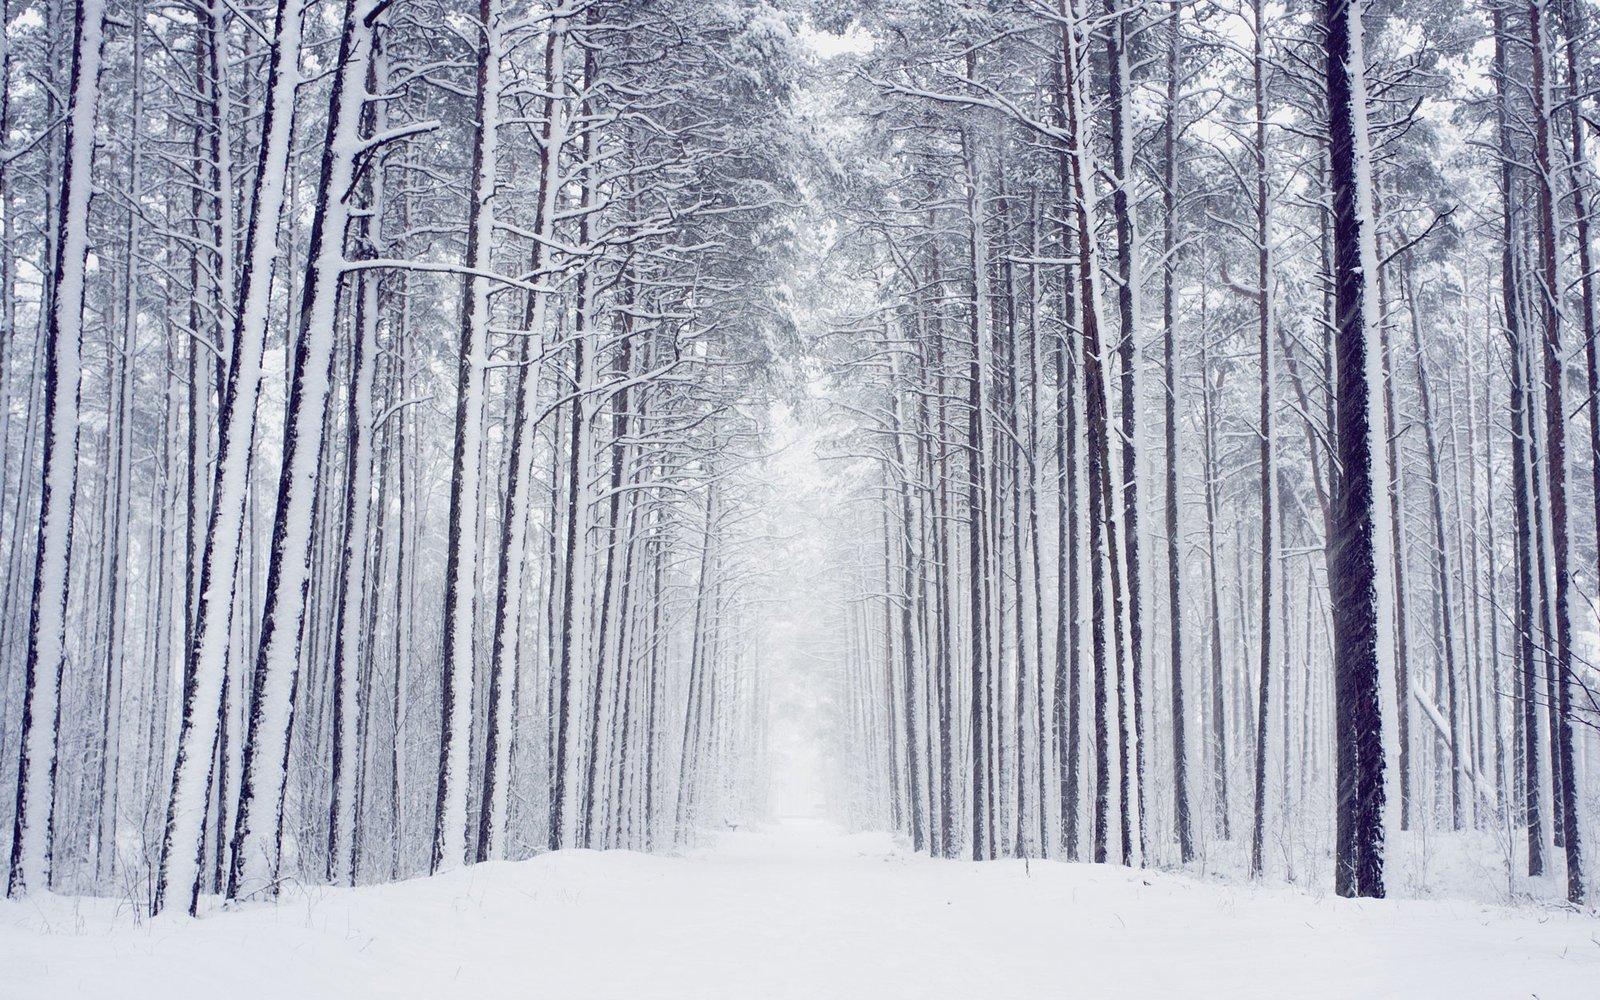 Winter Picture: View Beautiful Image of Winter Scenes